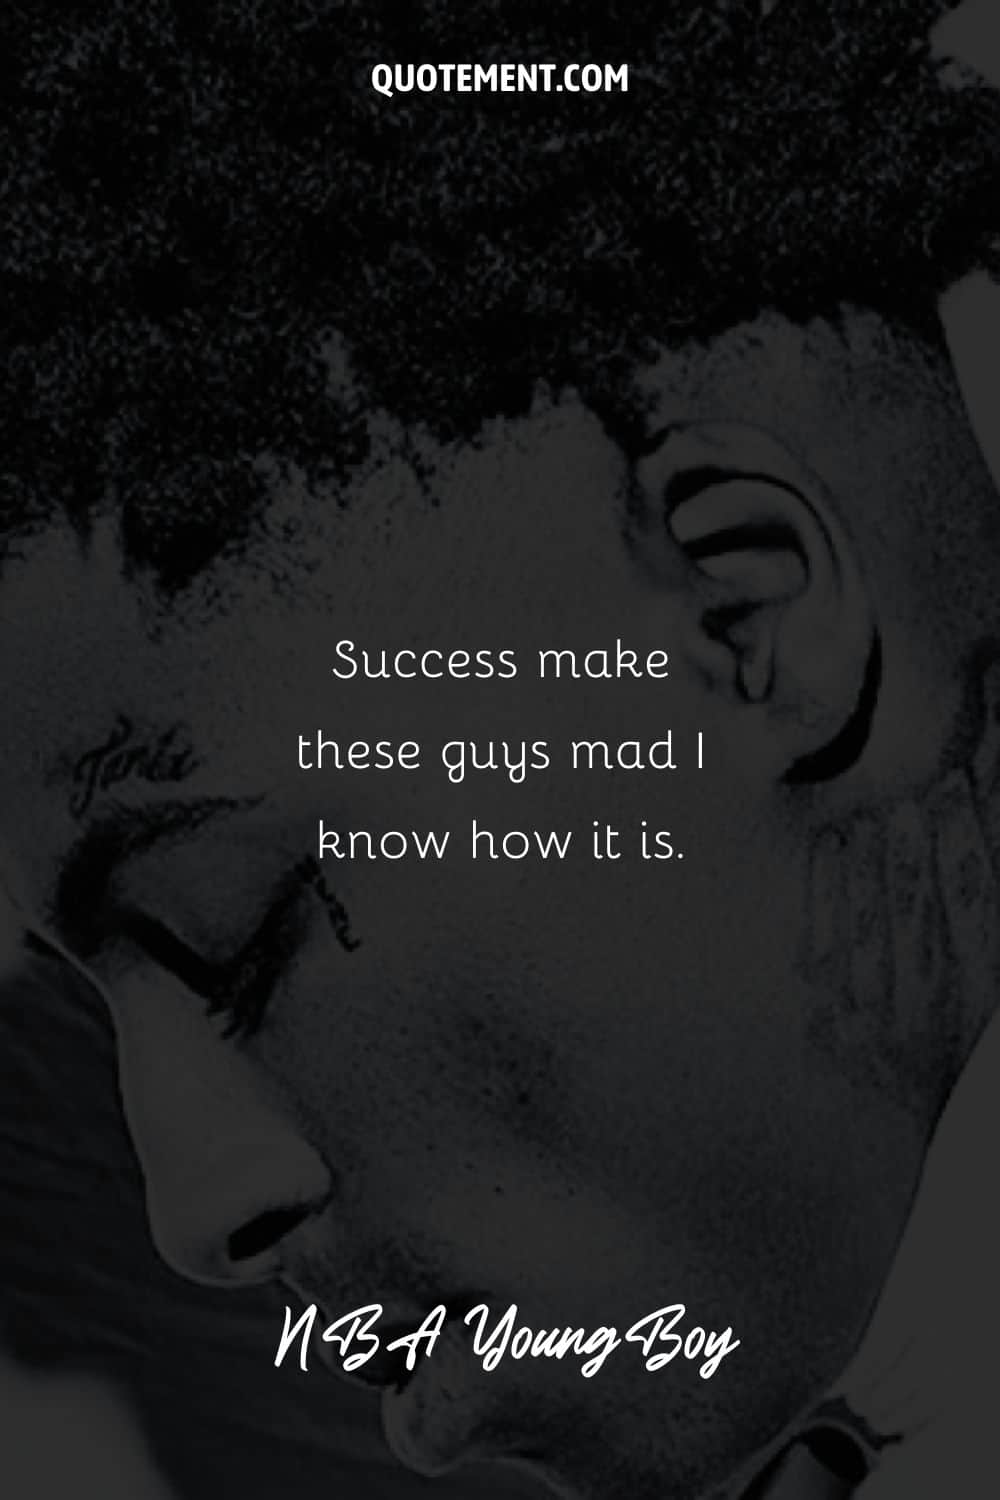 “Success make these guys mad I know how it is.” – NBA YoungBoy, “Ride On ‘Em”